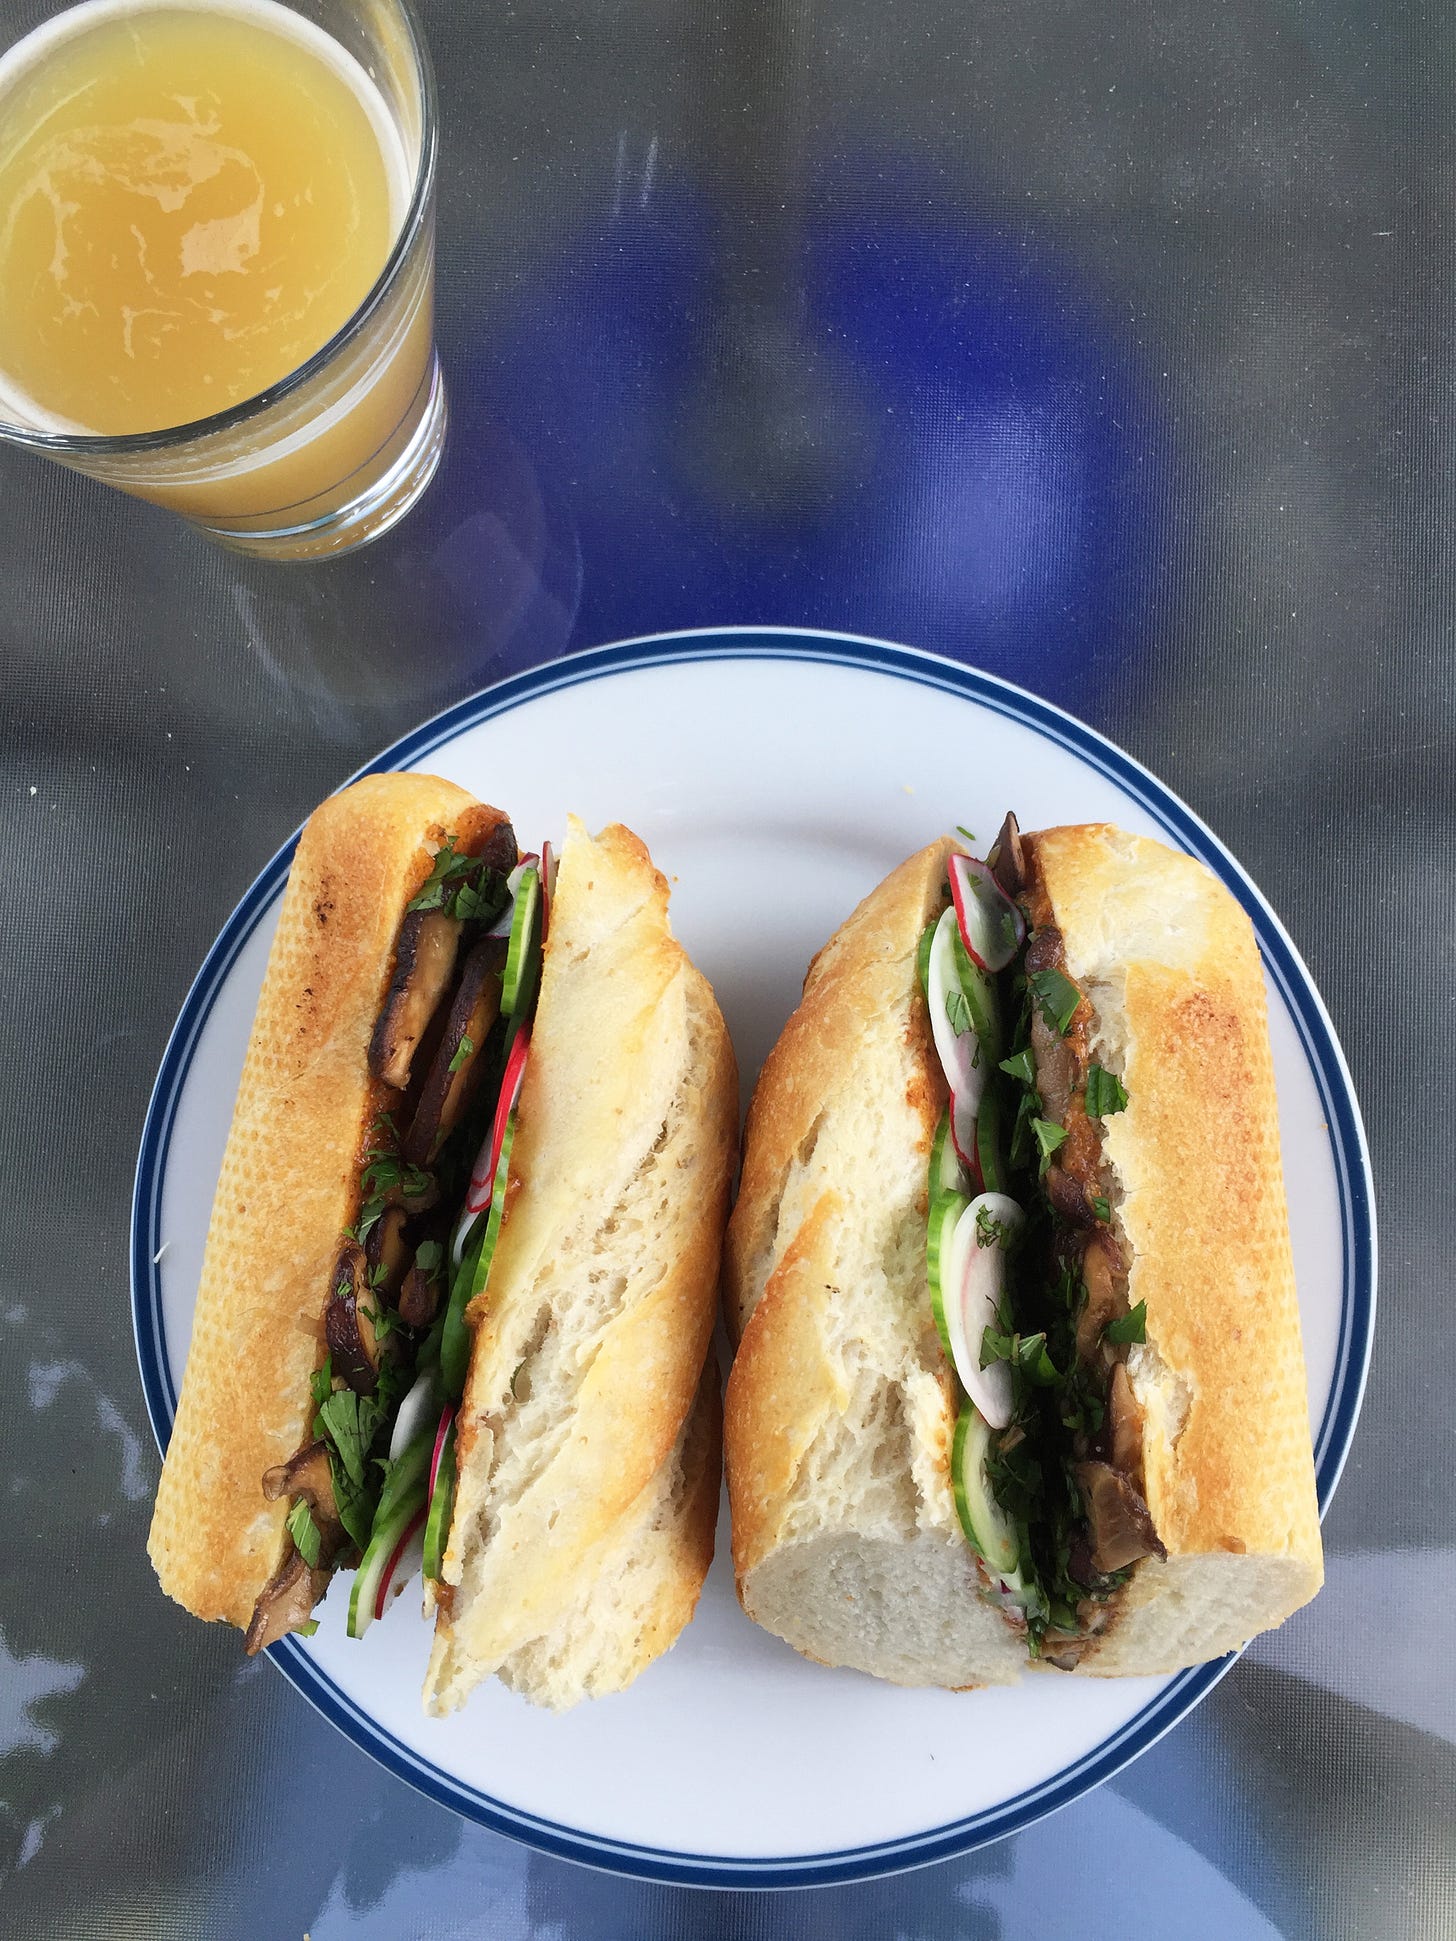 from above, a baguette sandwich cut in half with herbs, radish, cucumber, and mushrooms visible. In the upper left corner sits a cloudy glass of IPA.